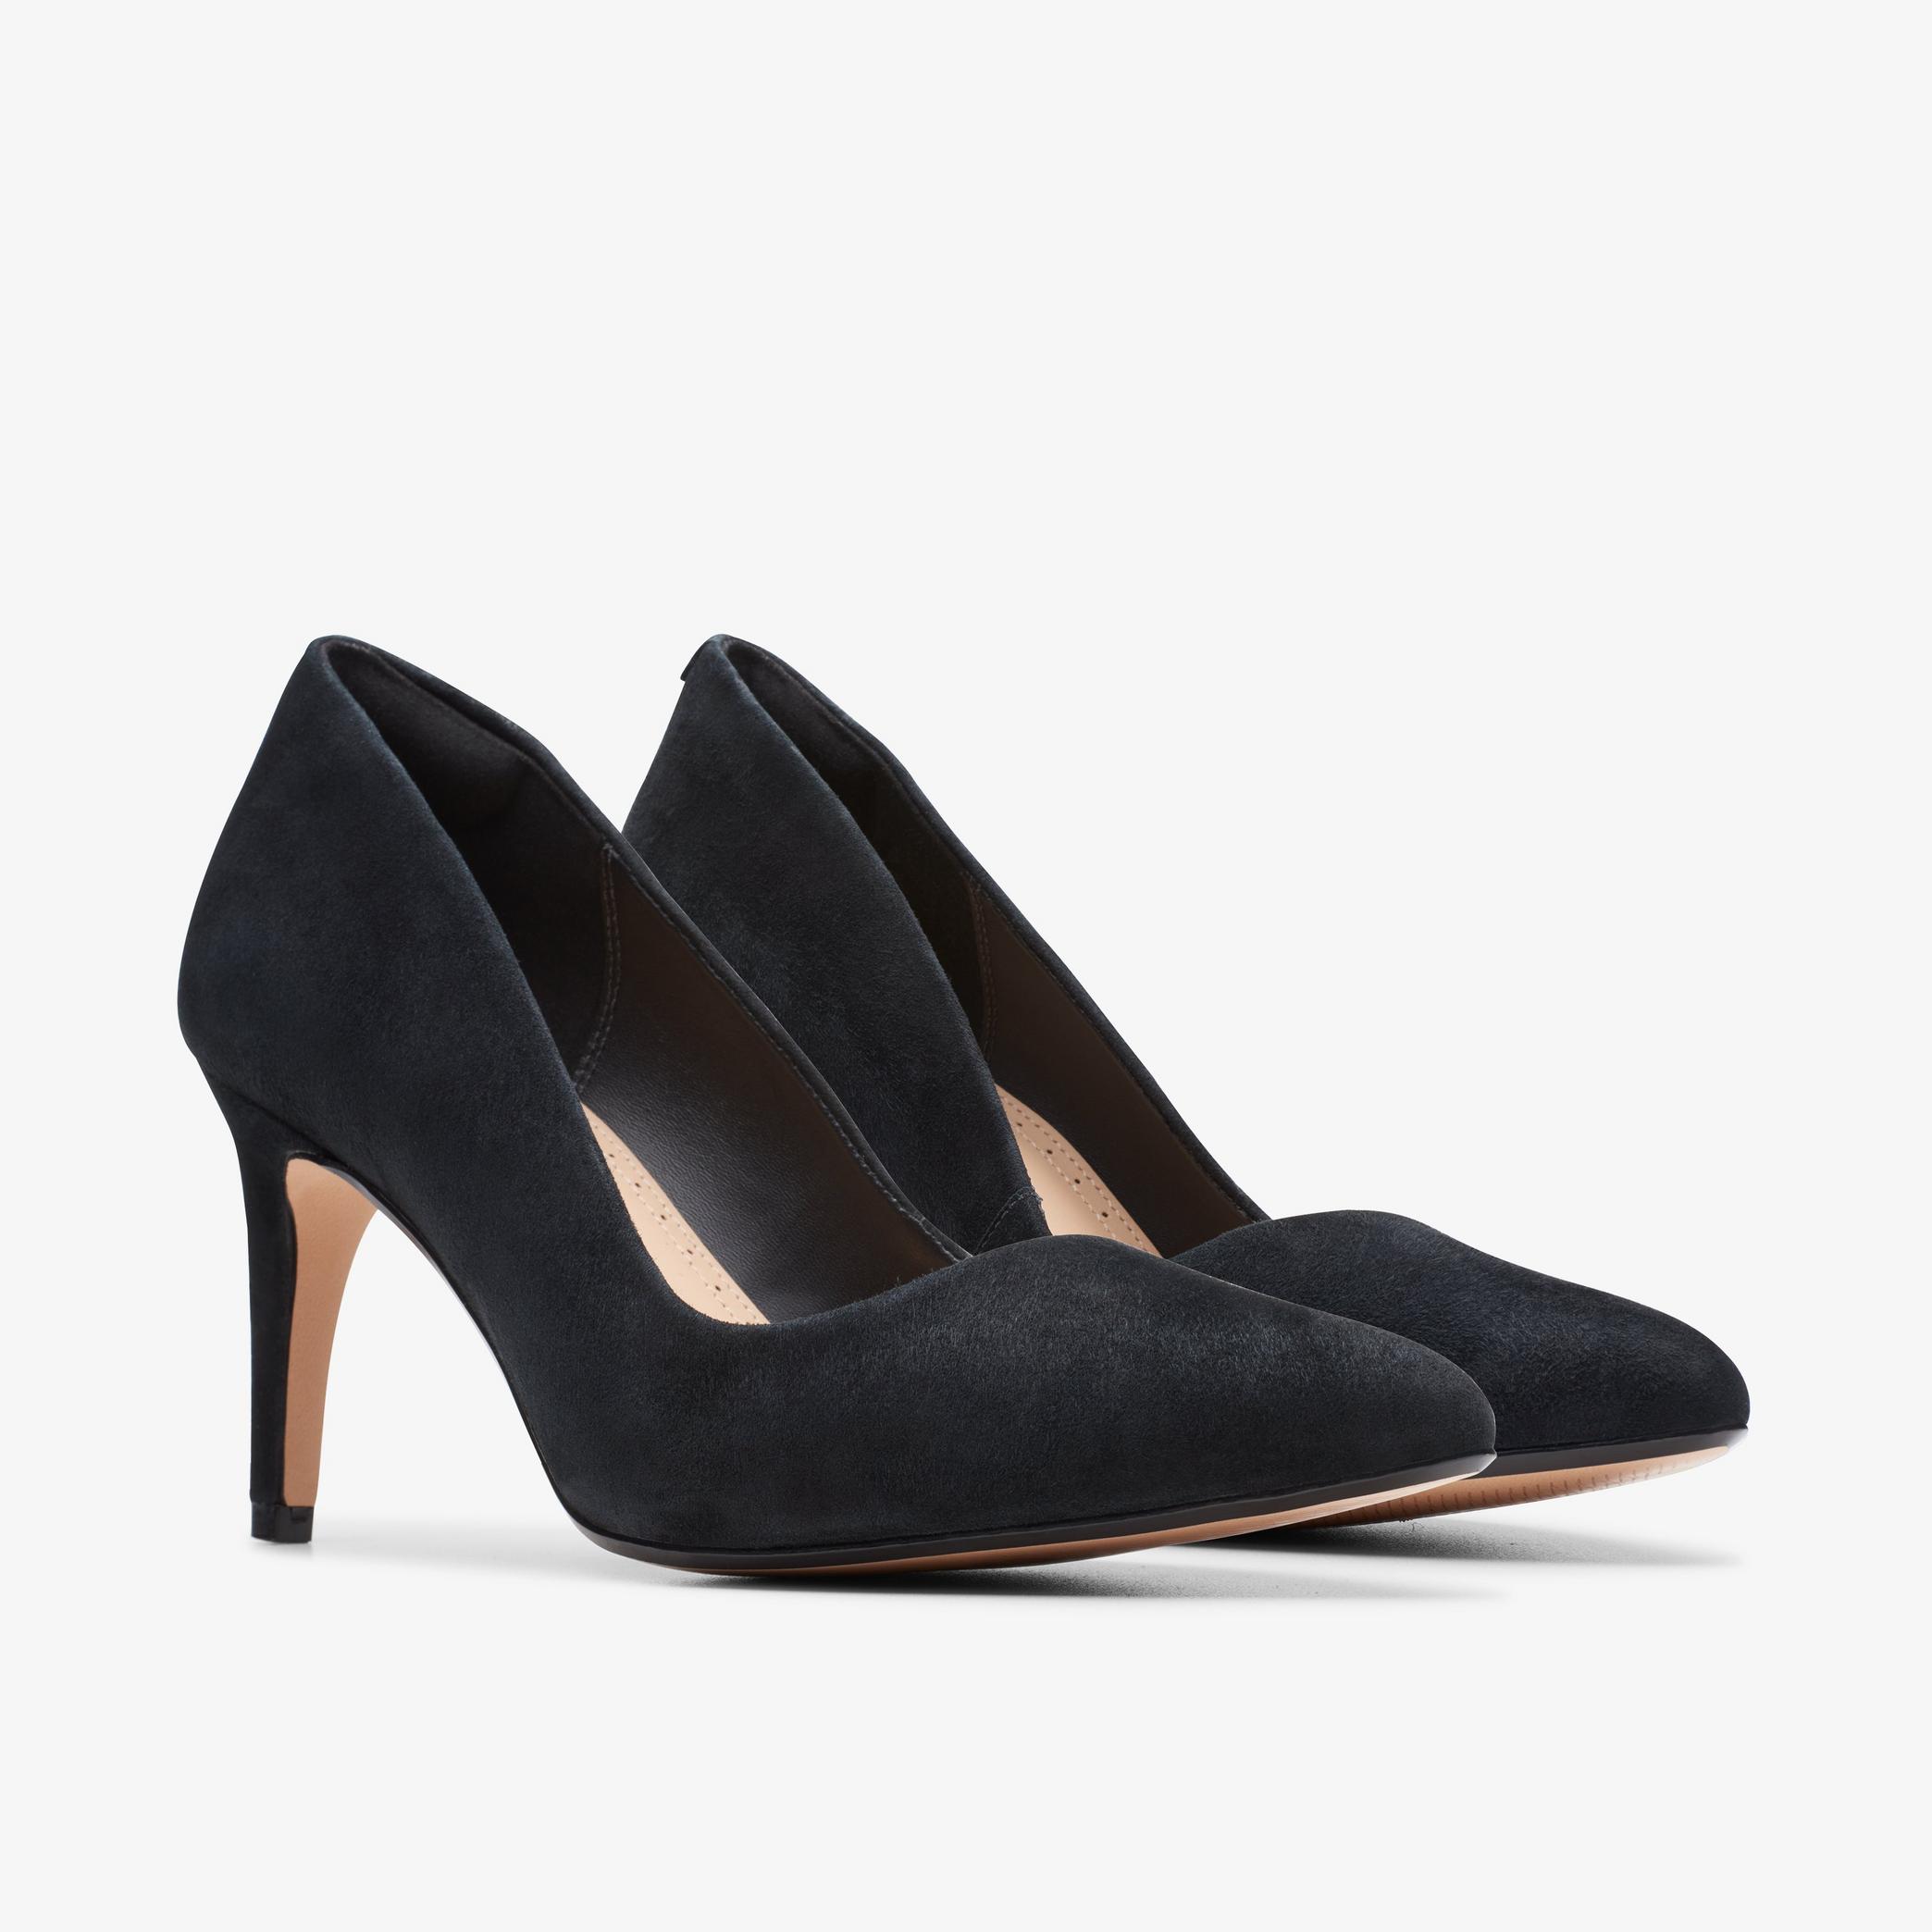 Laina Rae Black Suede Court Shoes, view 4 of 6